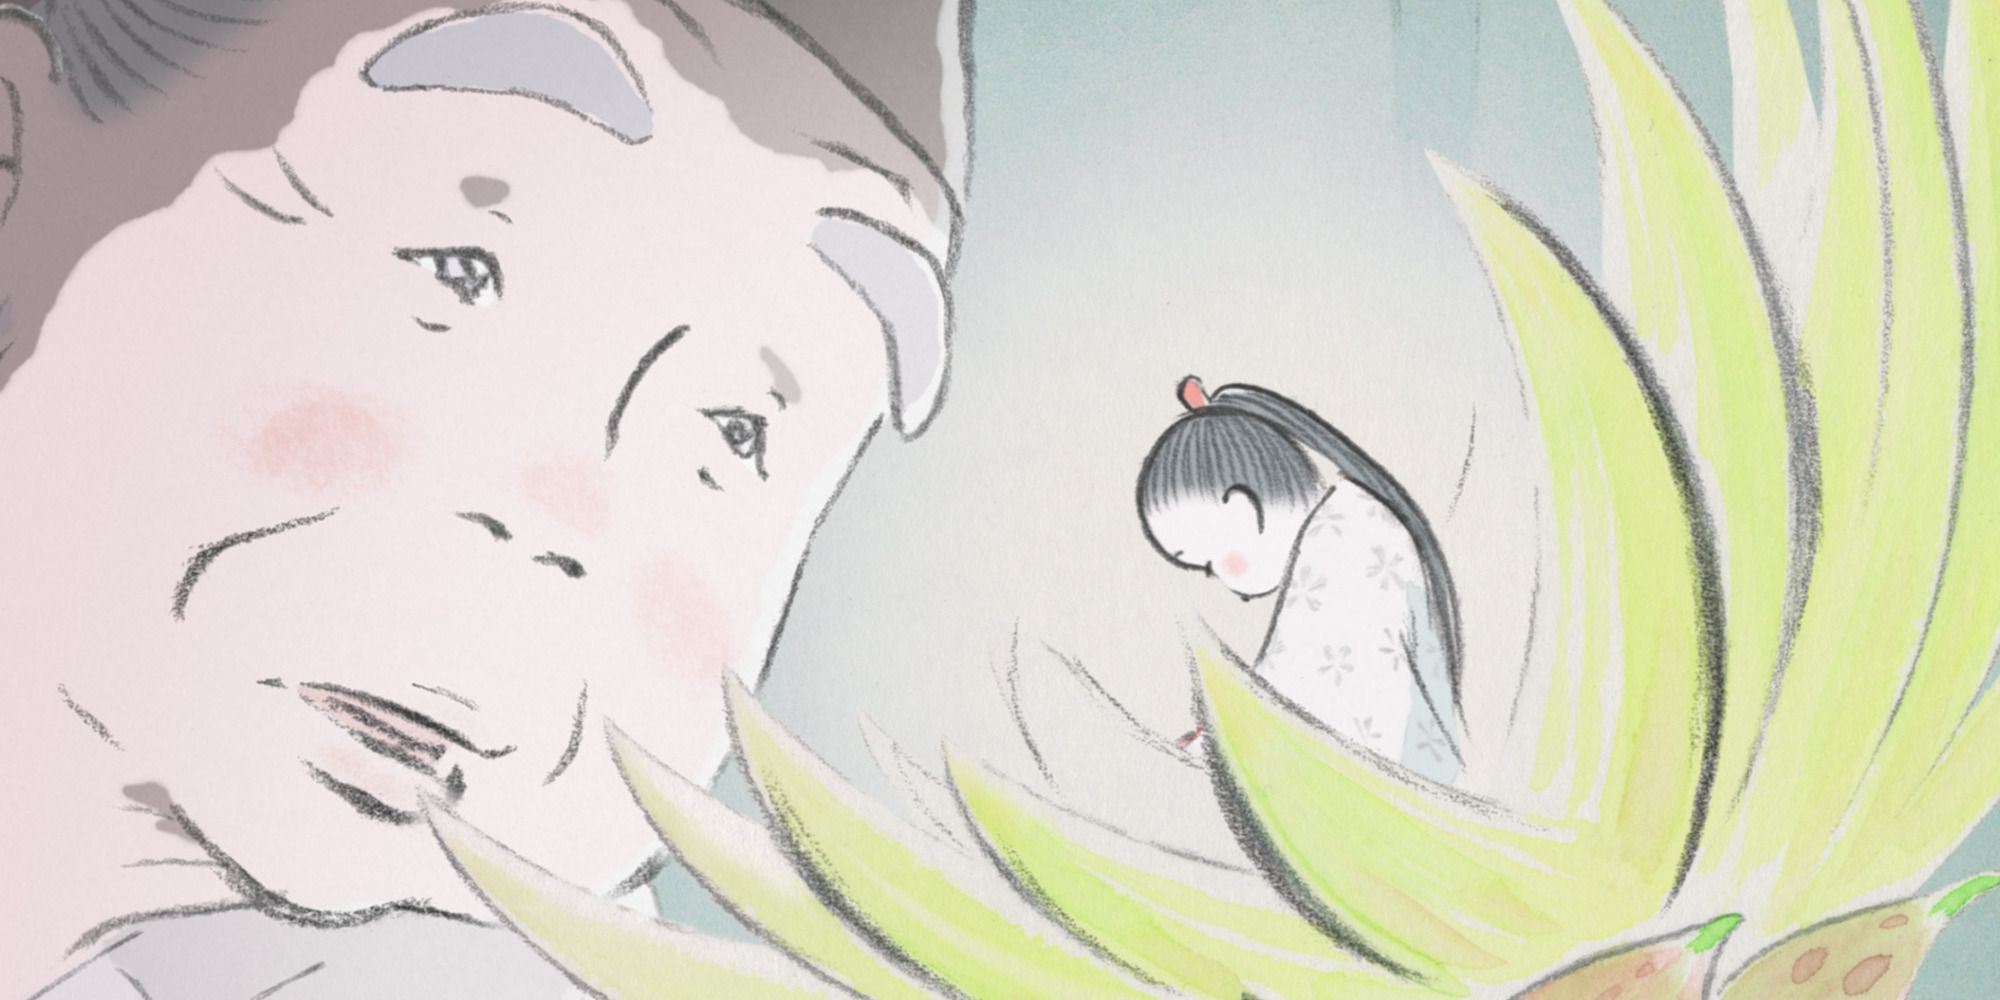 Bamboo cutter looking at a tiny Princess Kaguya inside a glowing flower